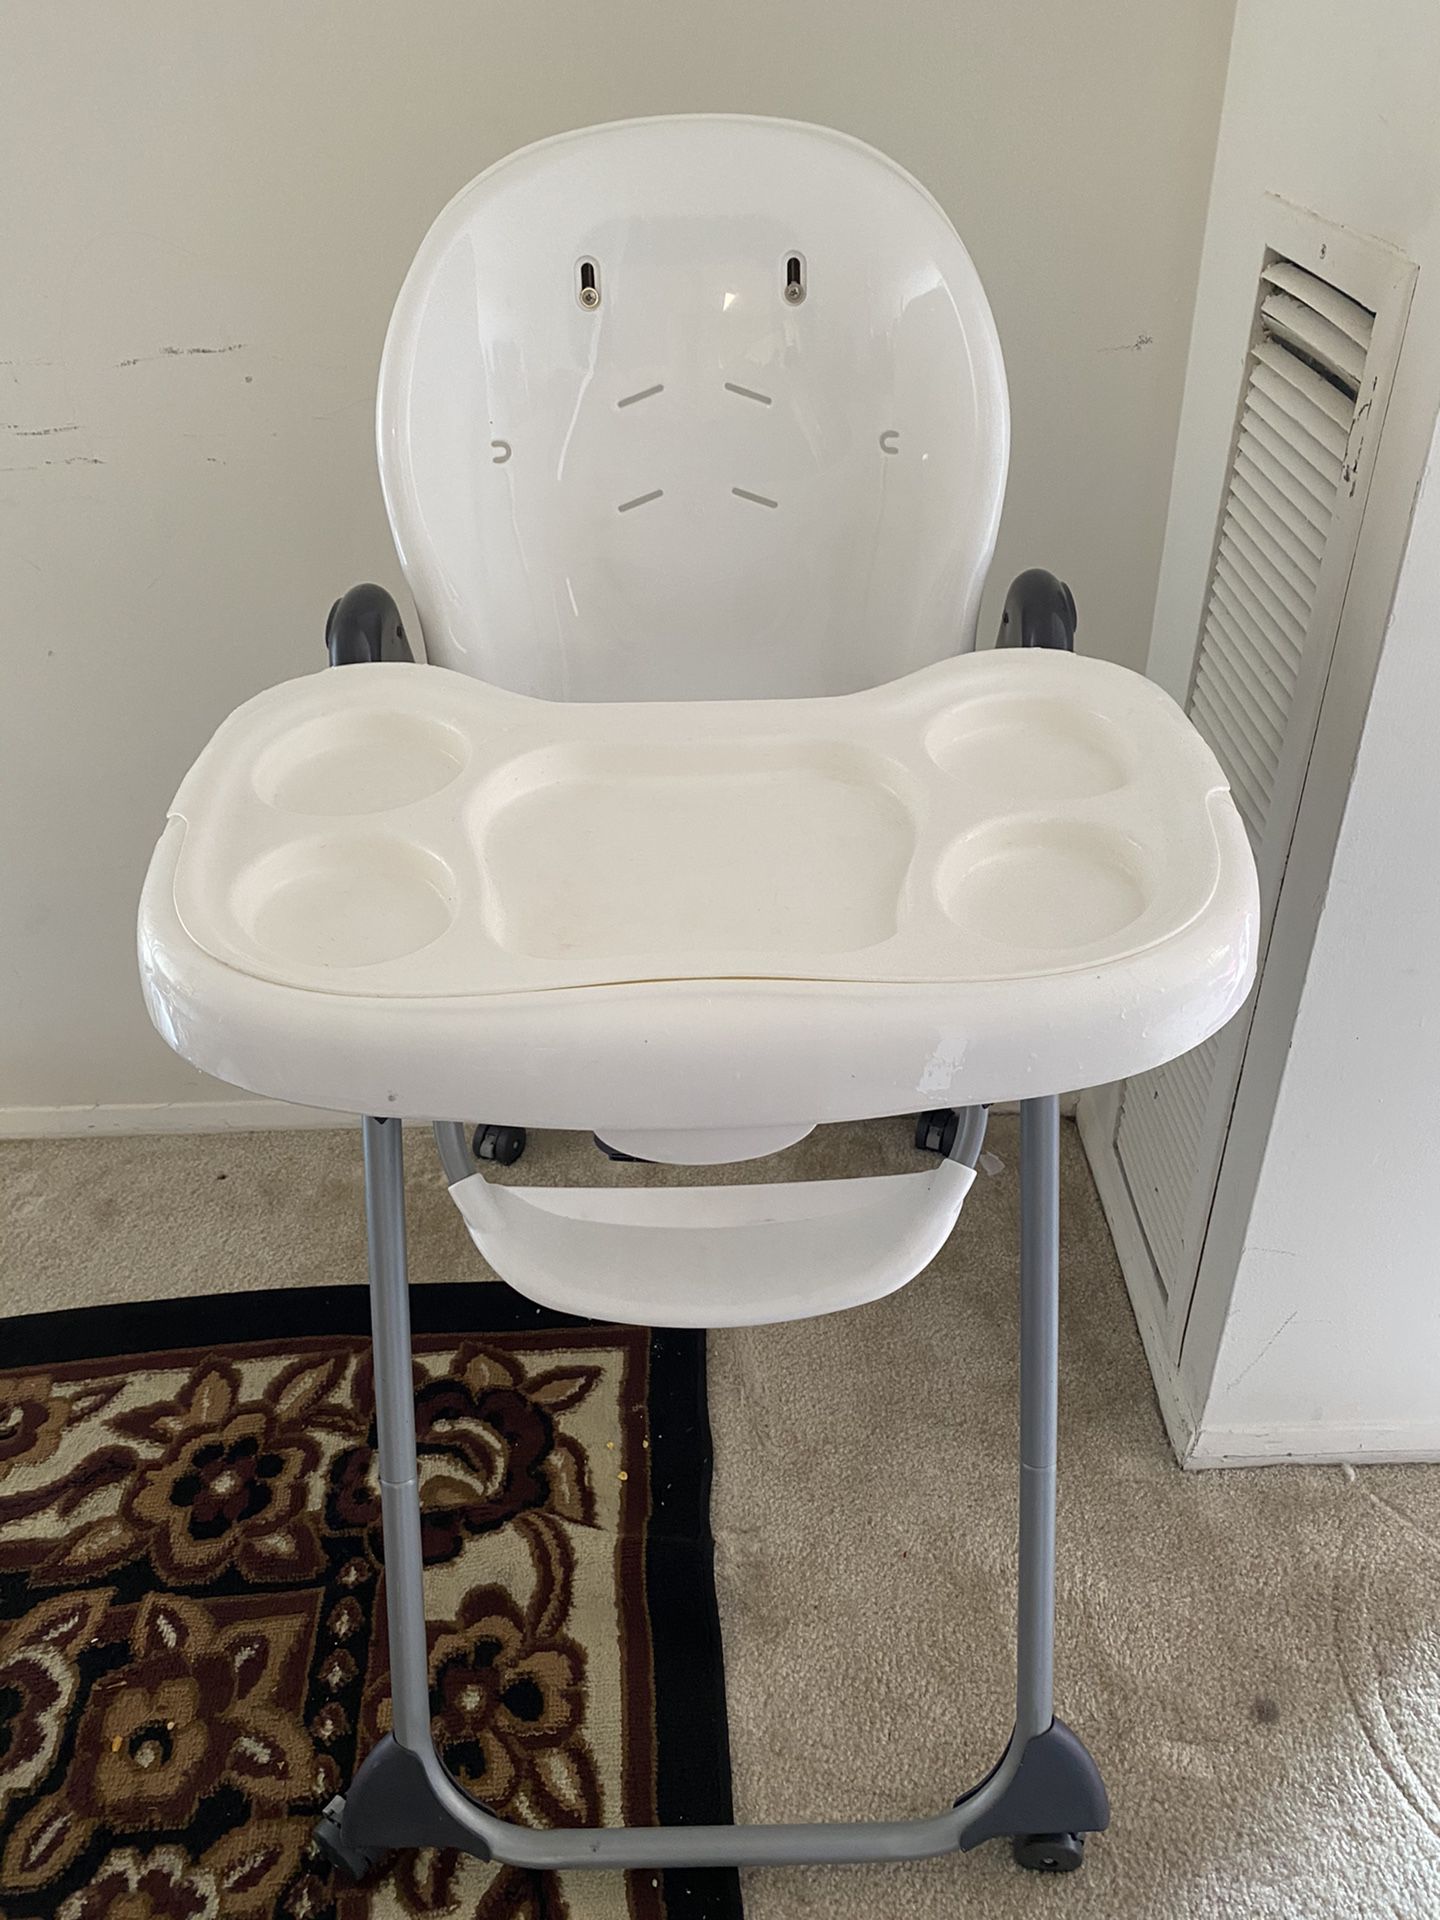 Baby trend high chair